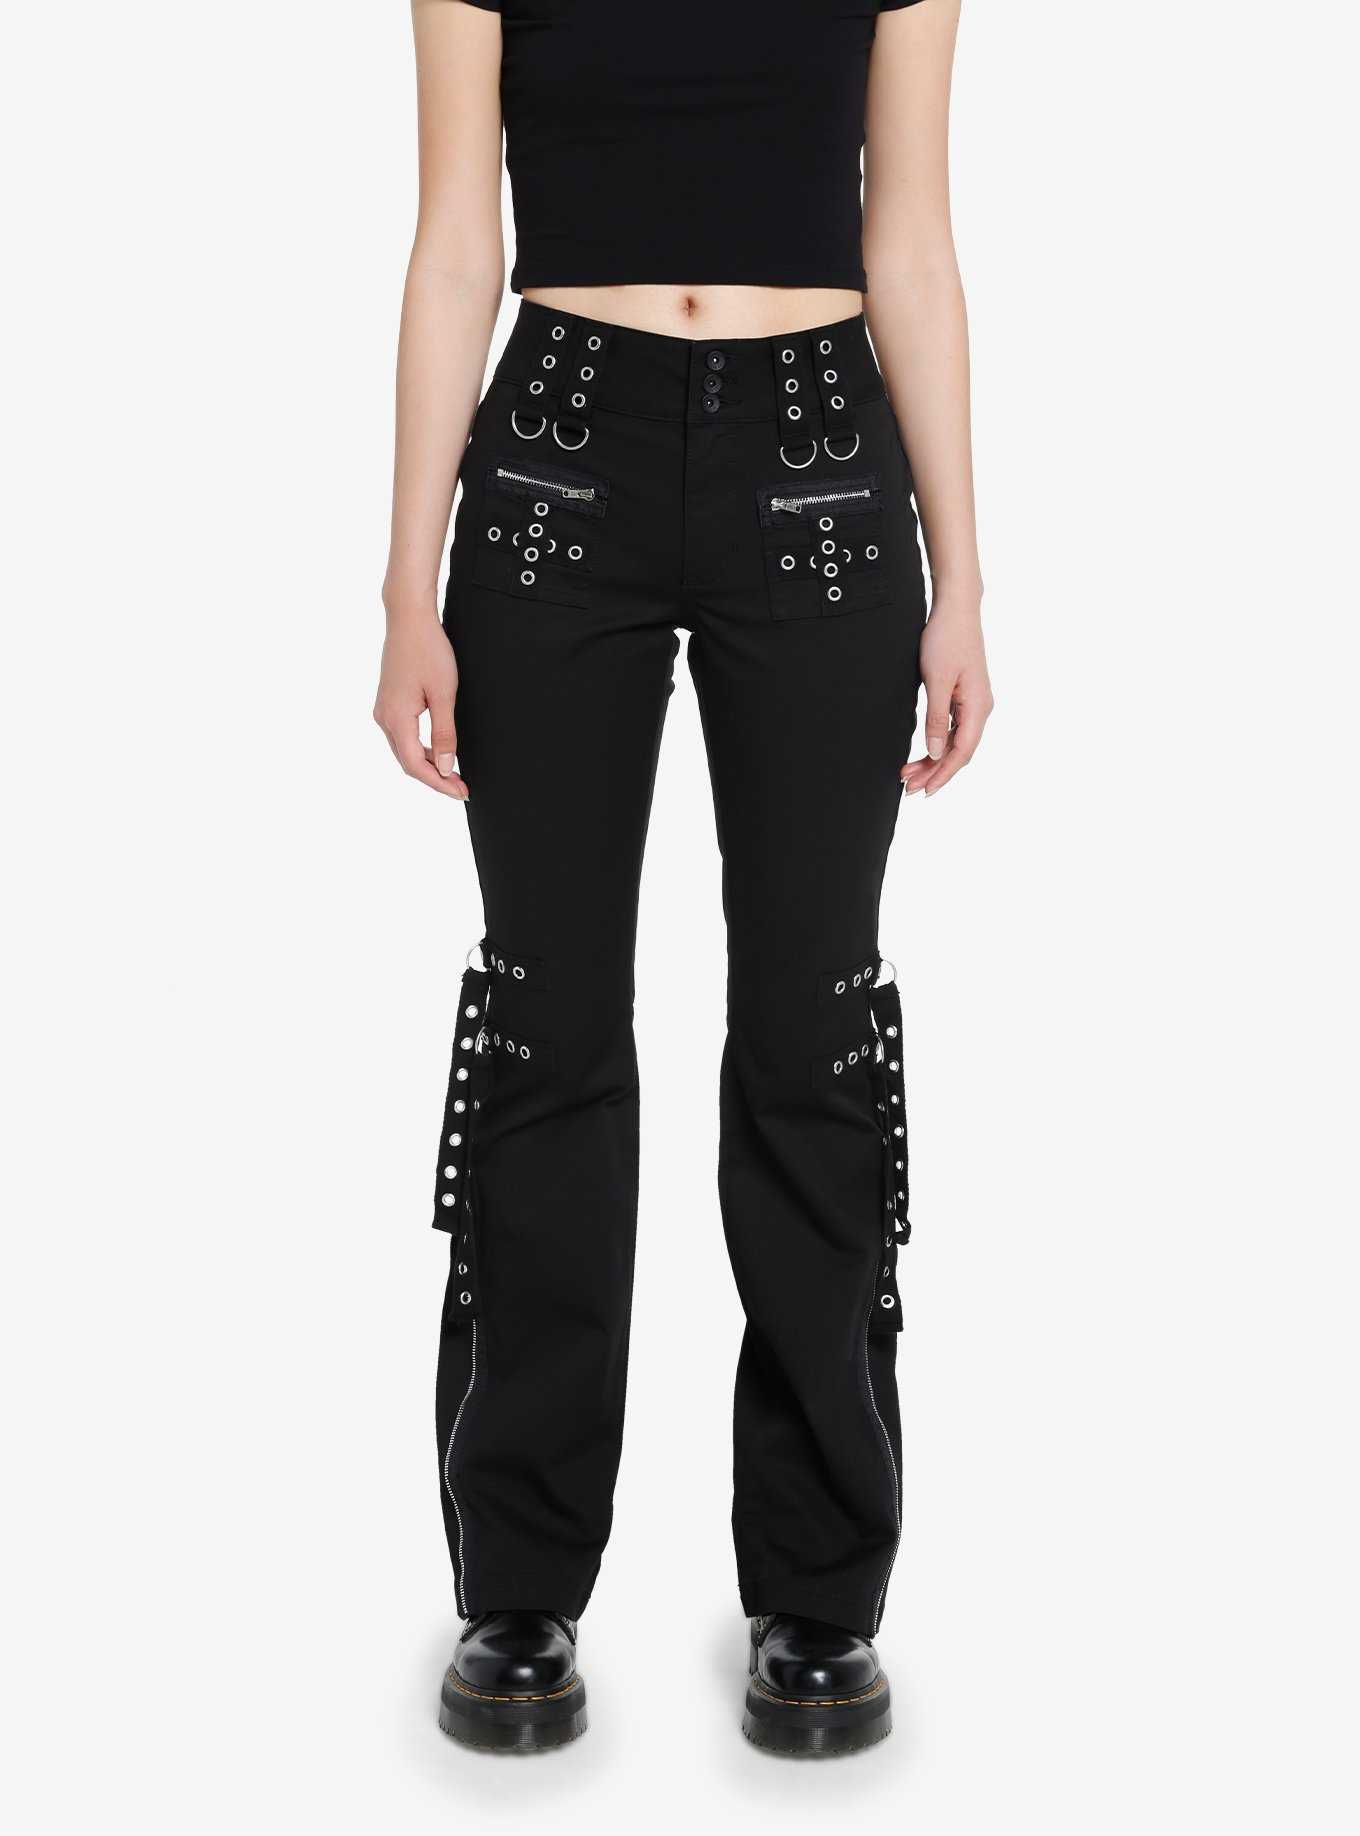 CBL's Guide to Los Angeles  Flared pants outfit, Black flare pants,  Fashion trend black